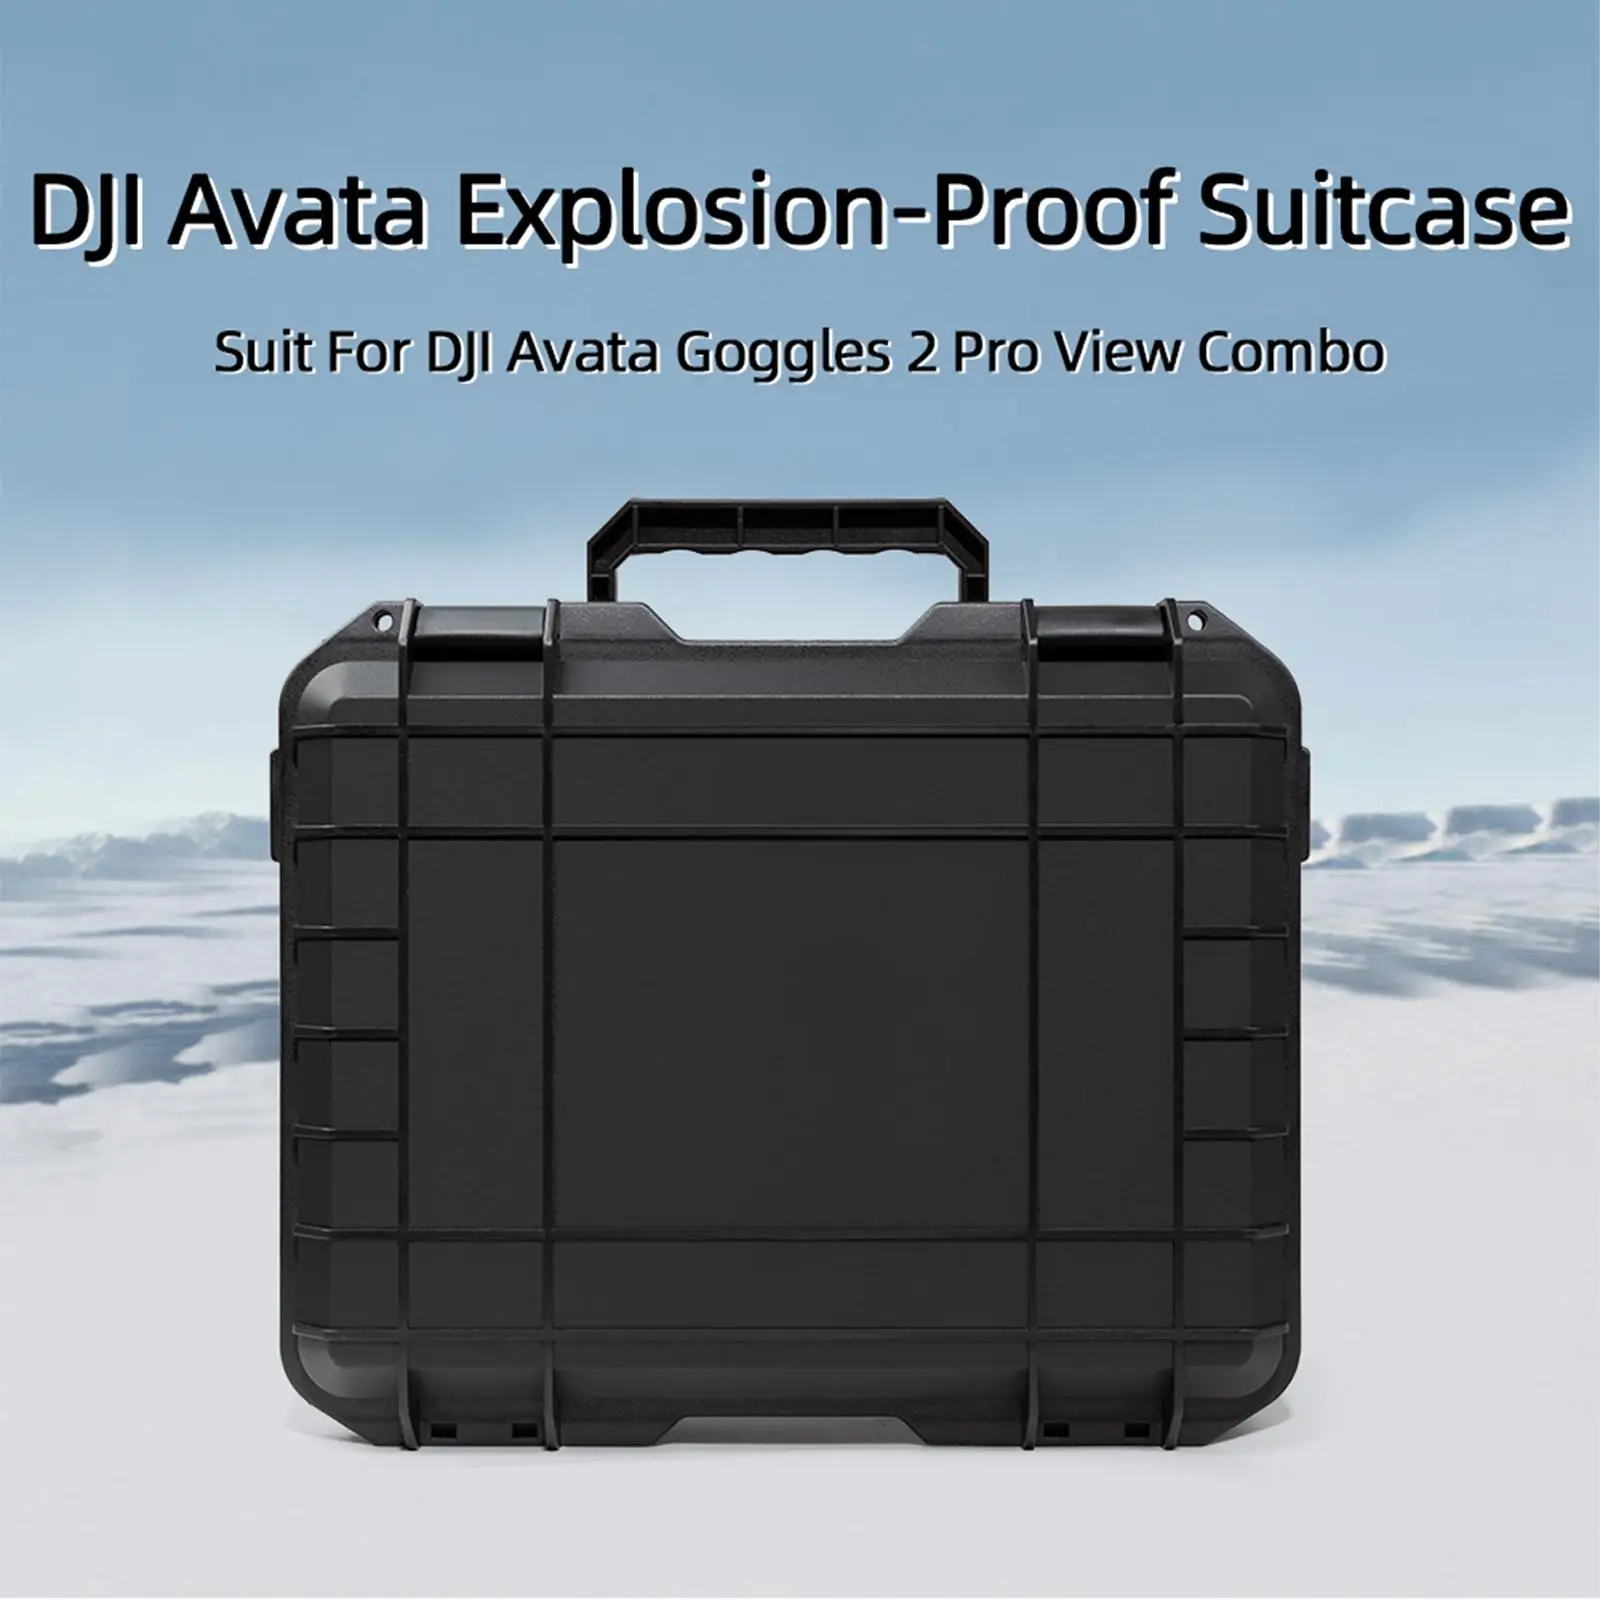 Storage Case Standard Portable Waterproof Pressure Resistant Suitcase View Combo Accessories Drone